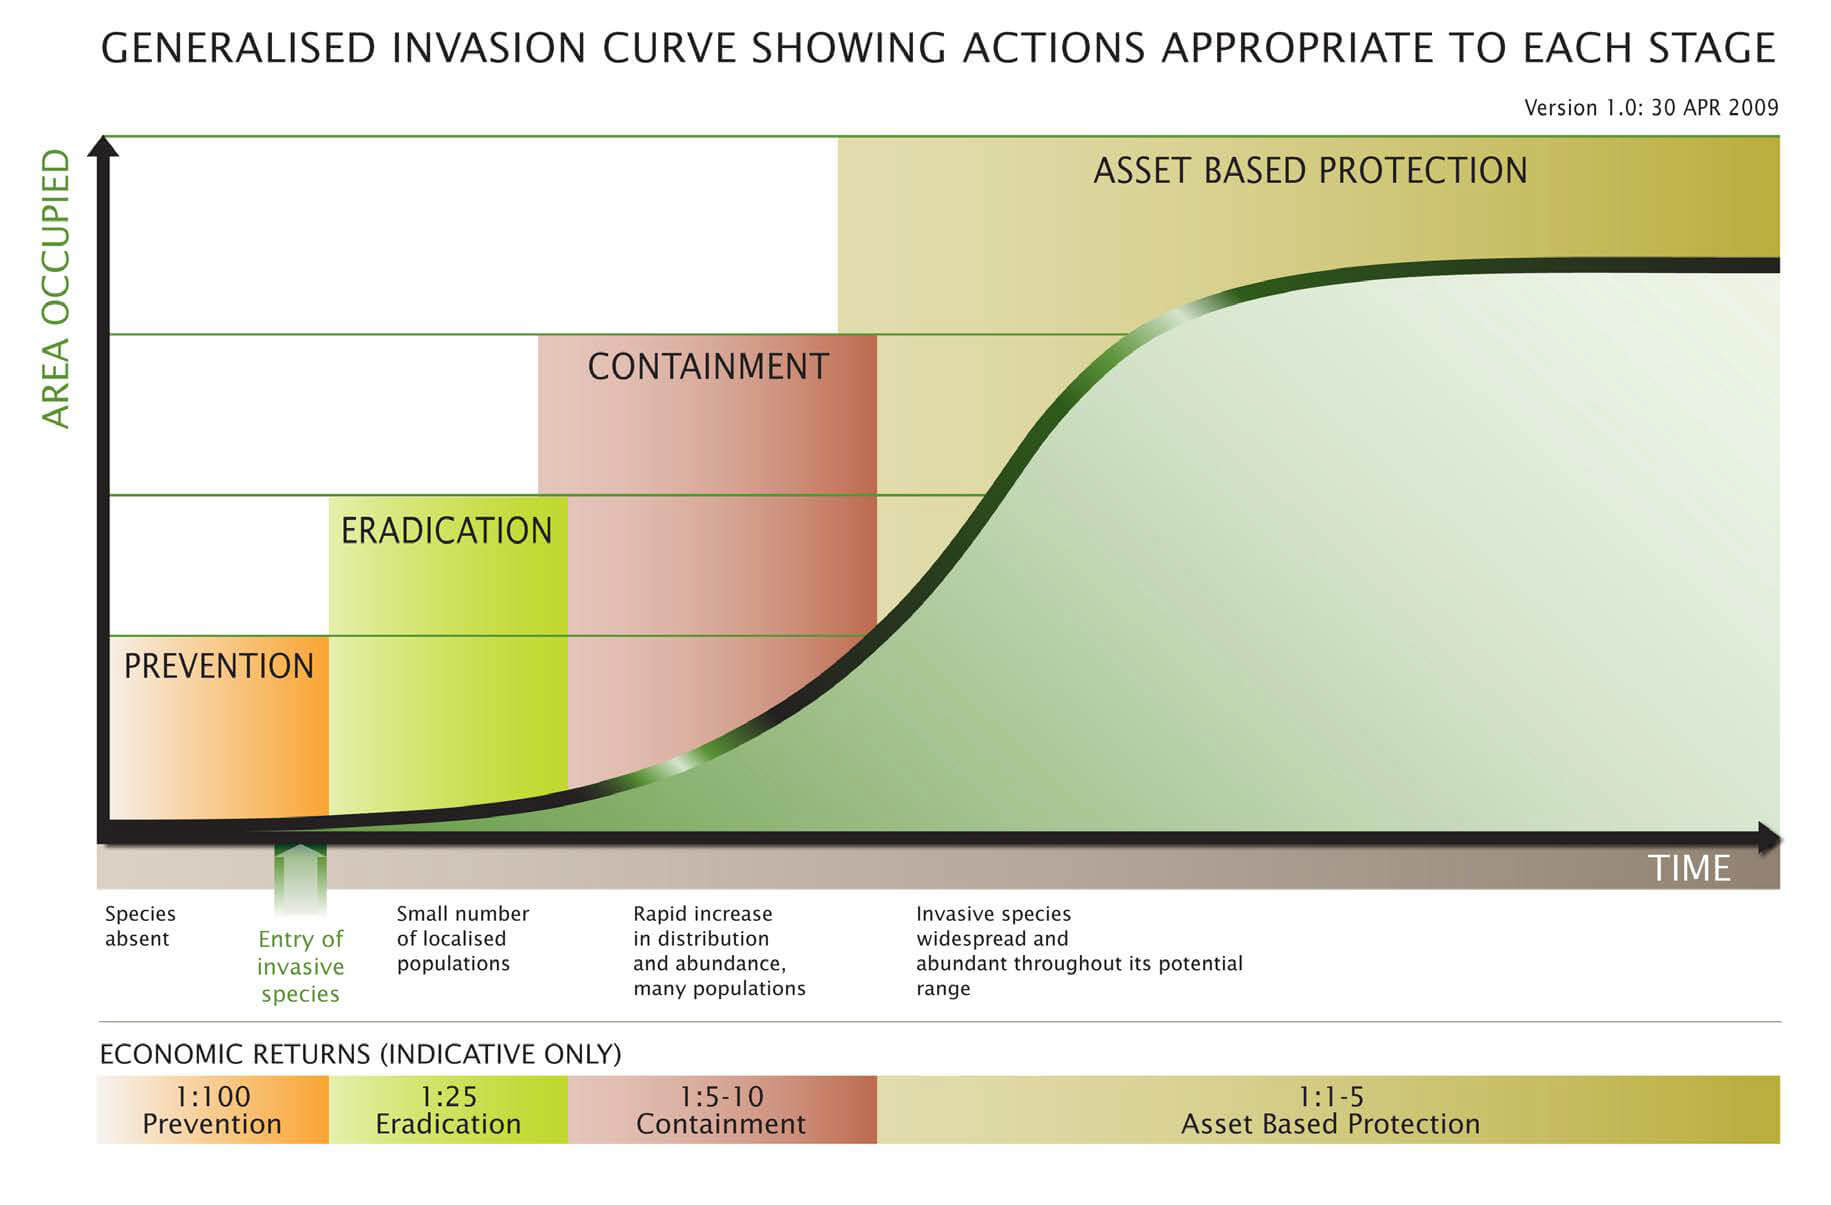 Generalised Invasion Curve showing actions appropriate to each stage